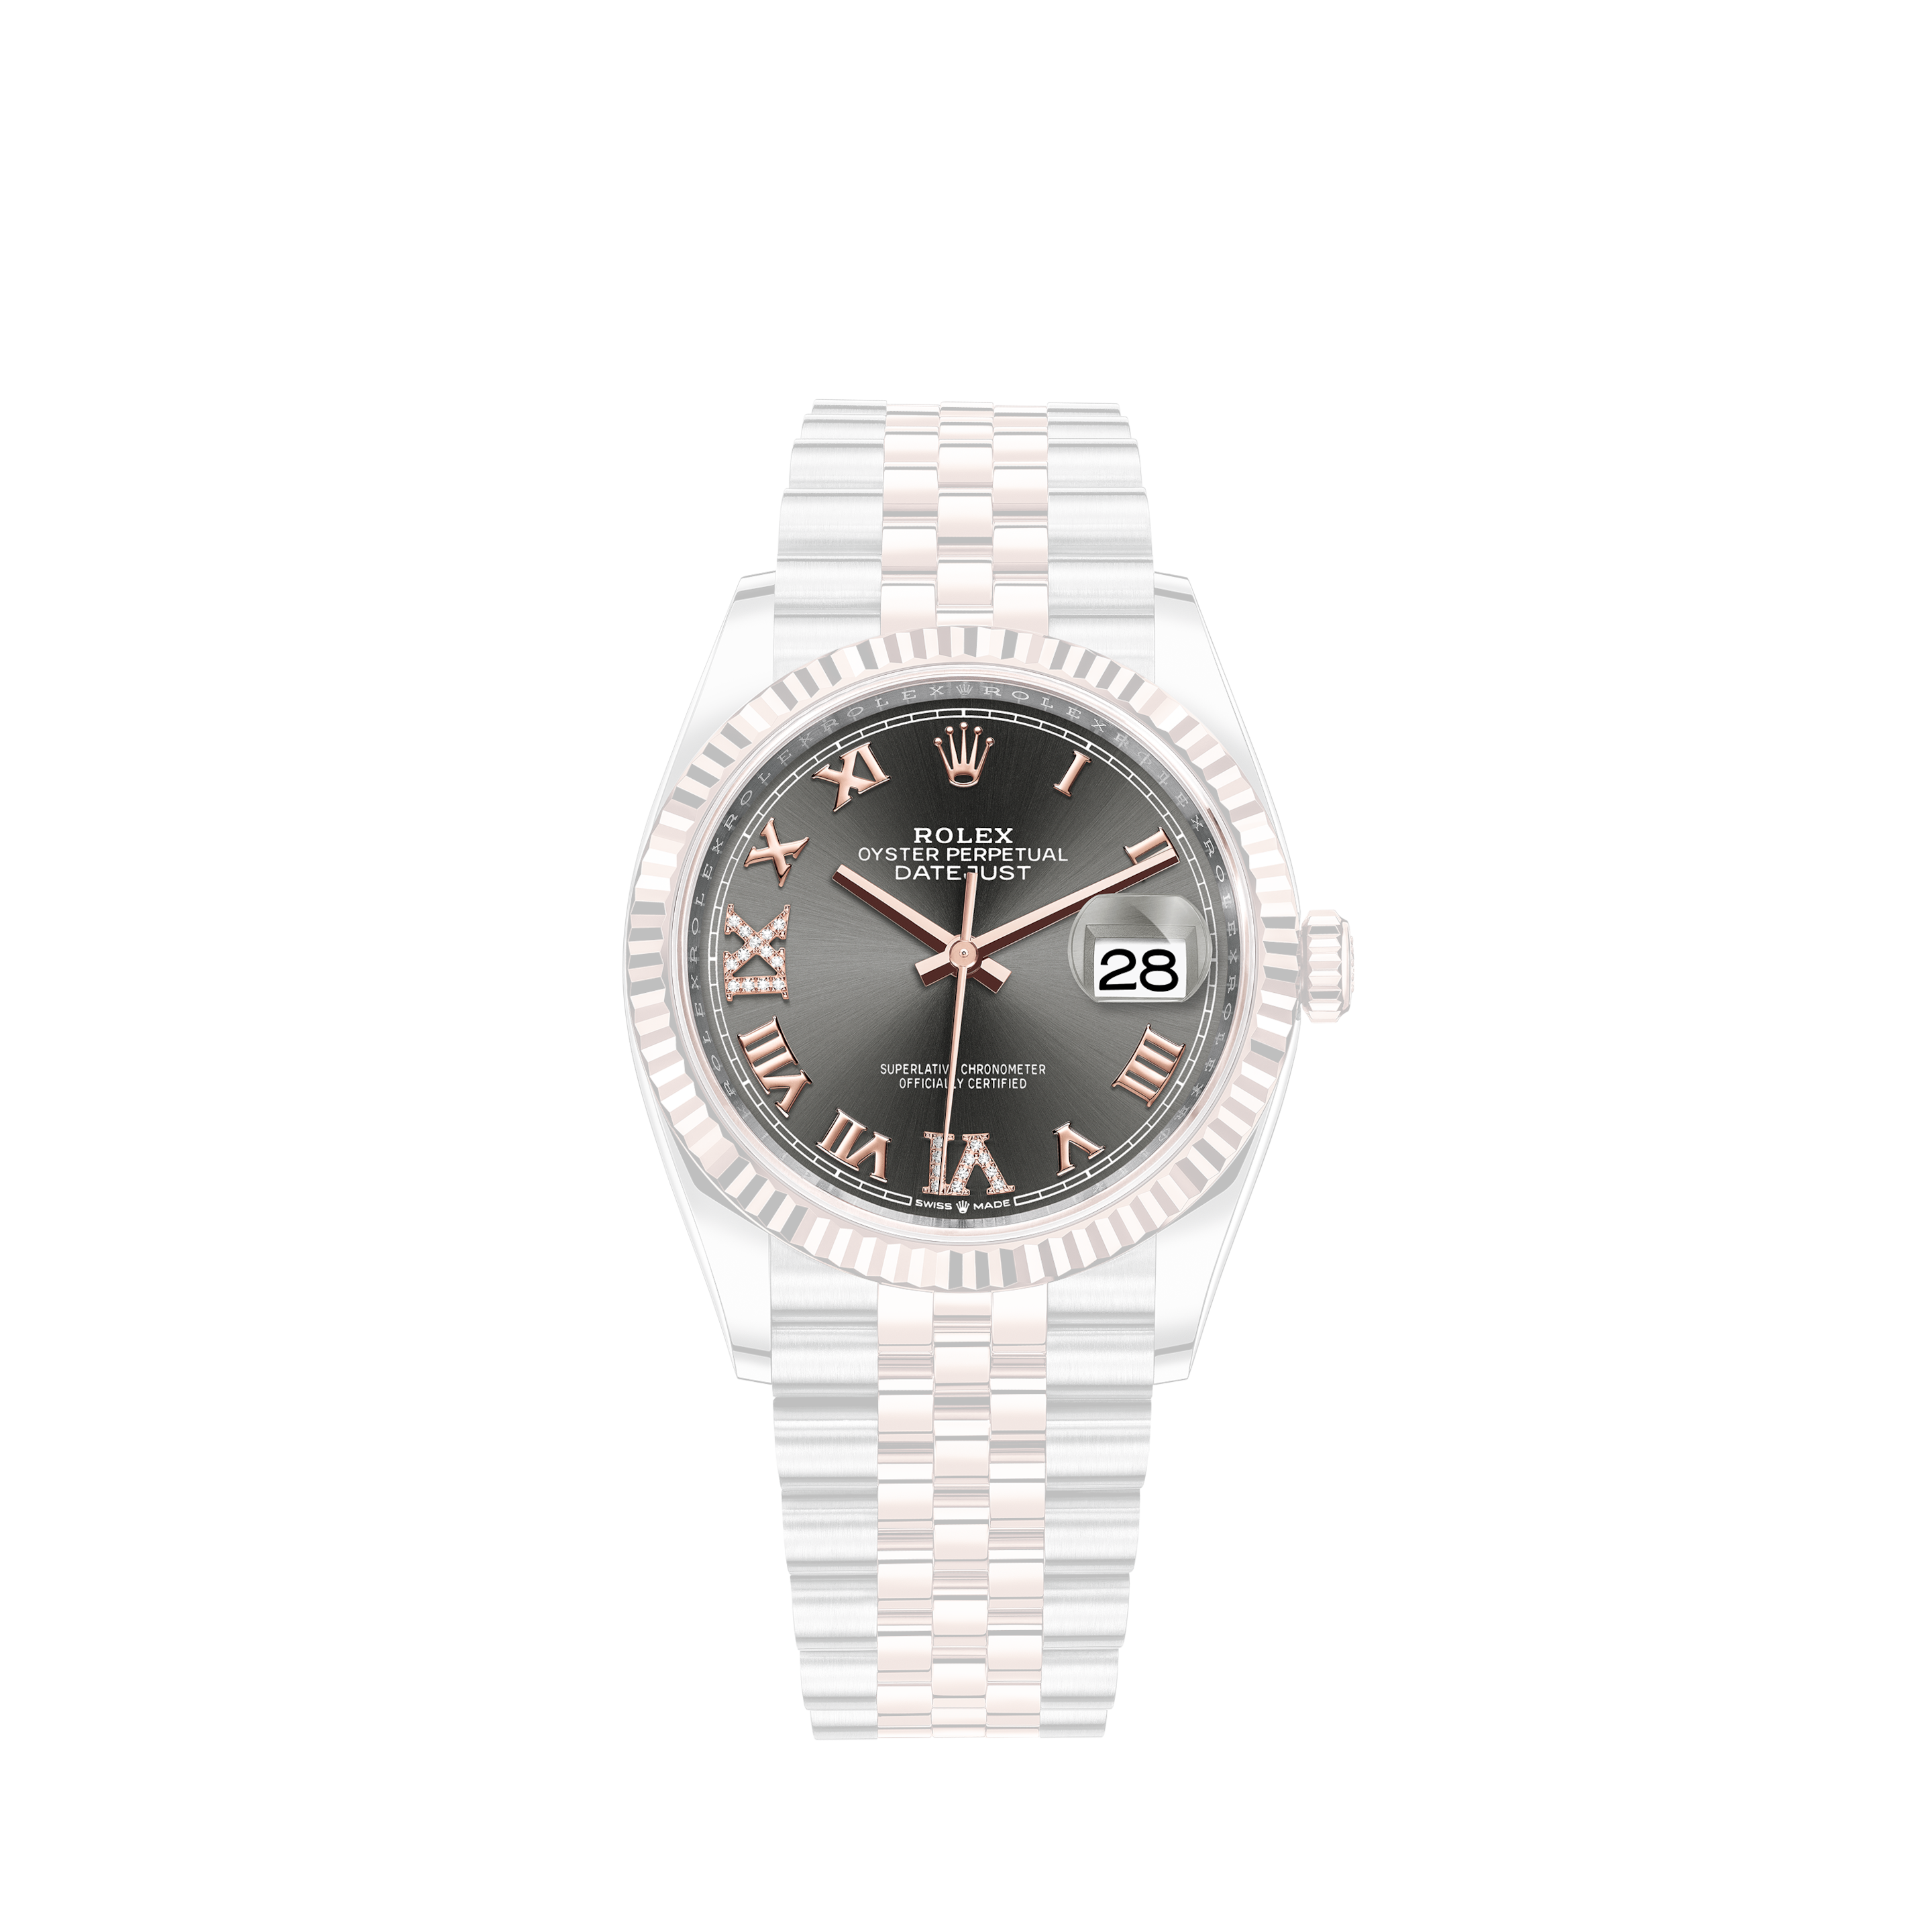 Rolex Lady-Datejust 26 Champagne Roman Numeral Dial Watch 179163